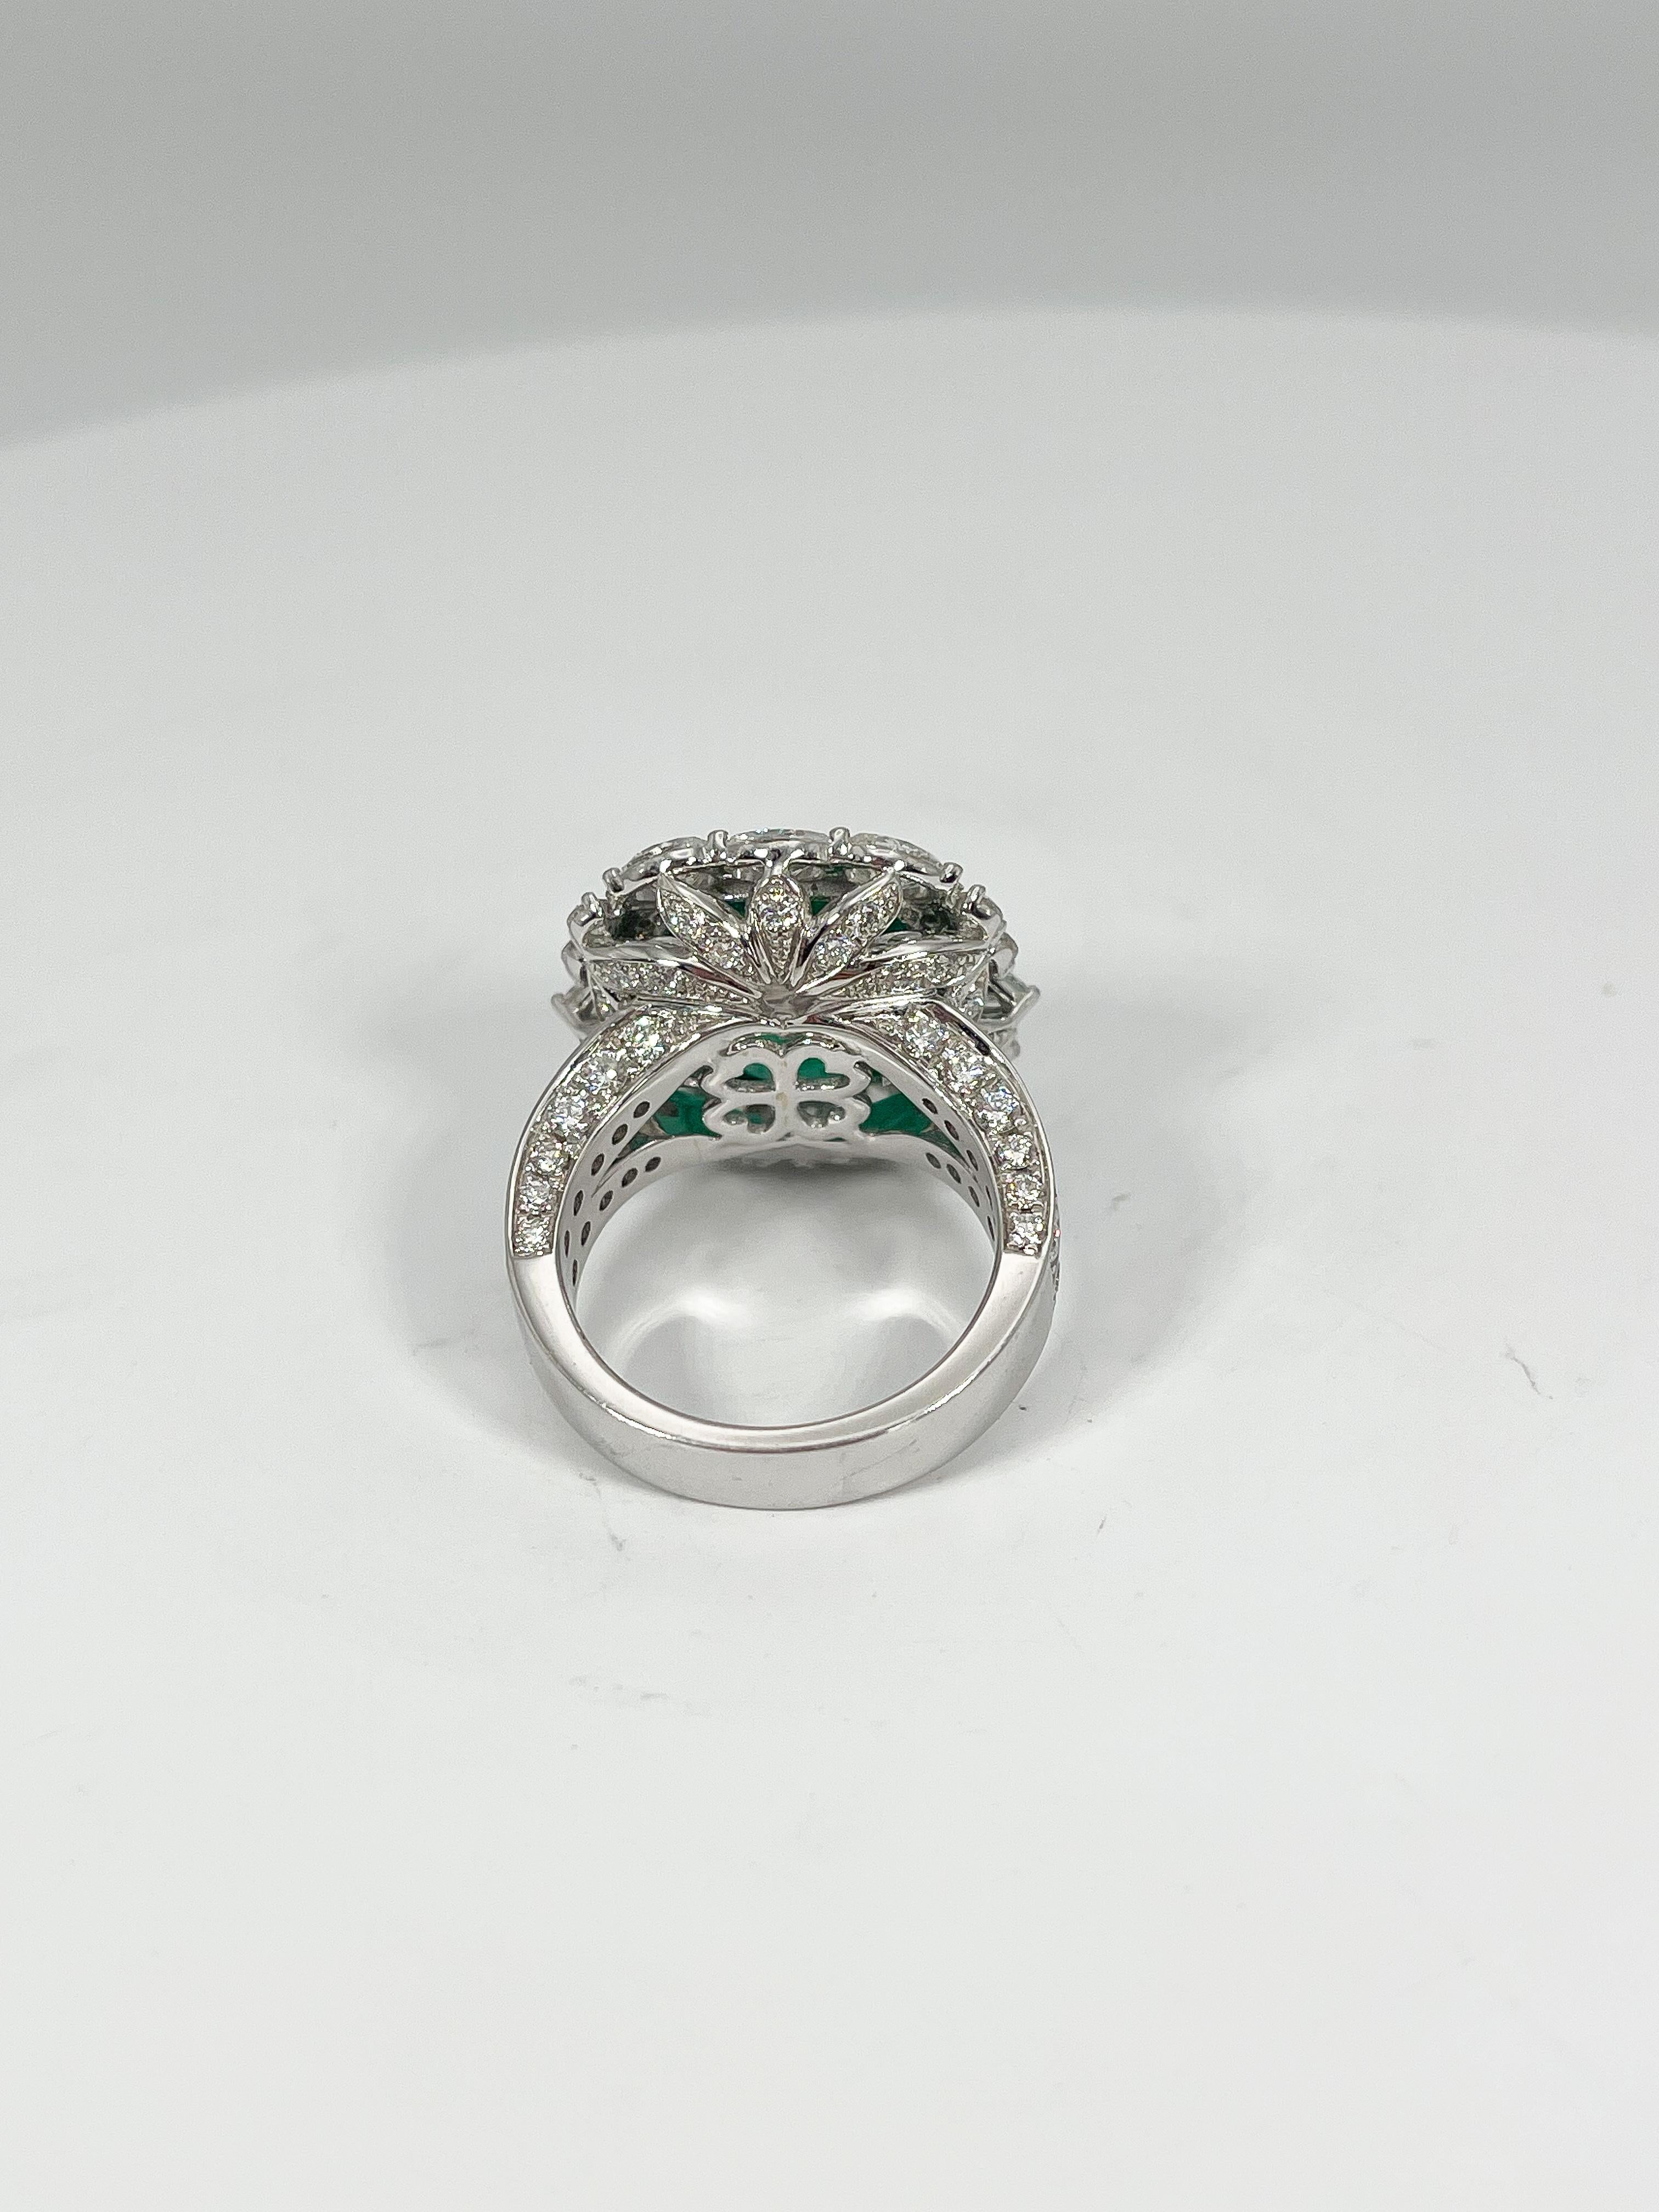 Women's 18K White Gold Cushion Brilliant Cut 9.08 CT Emerald and 5.36 CTW Diamond Ring For Sale